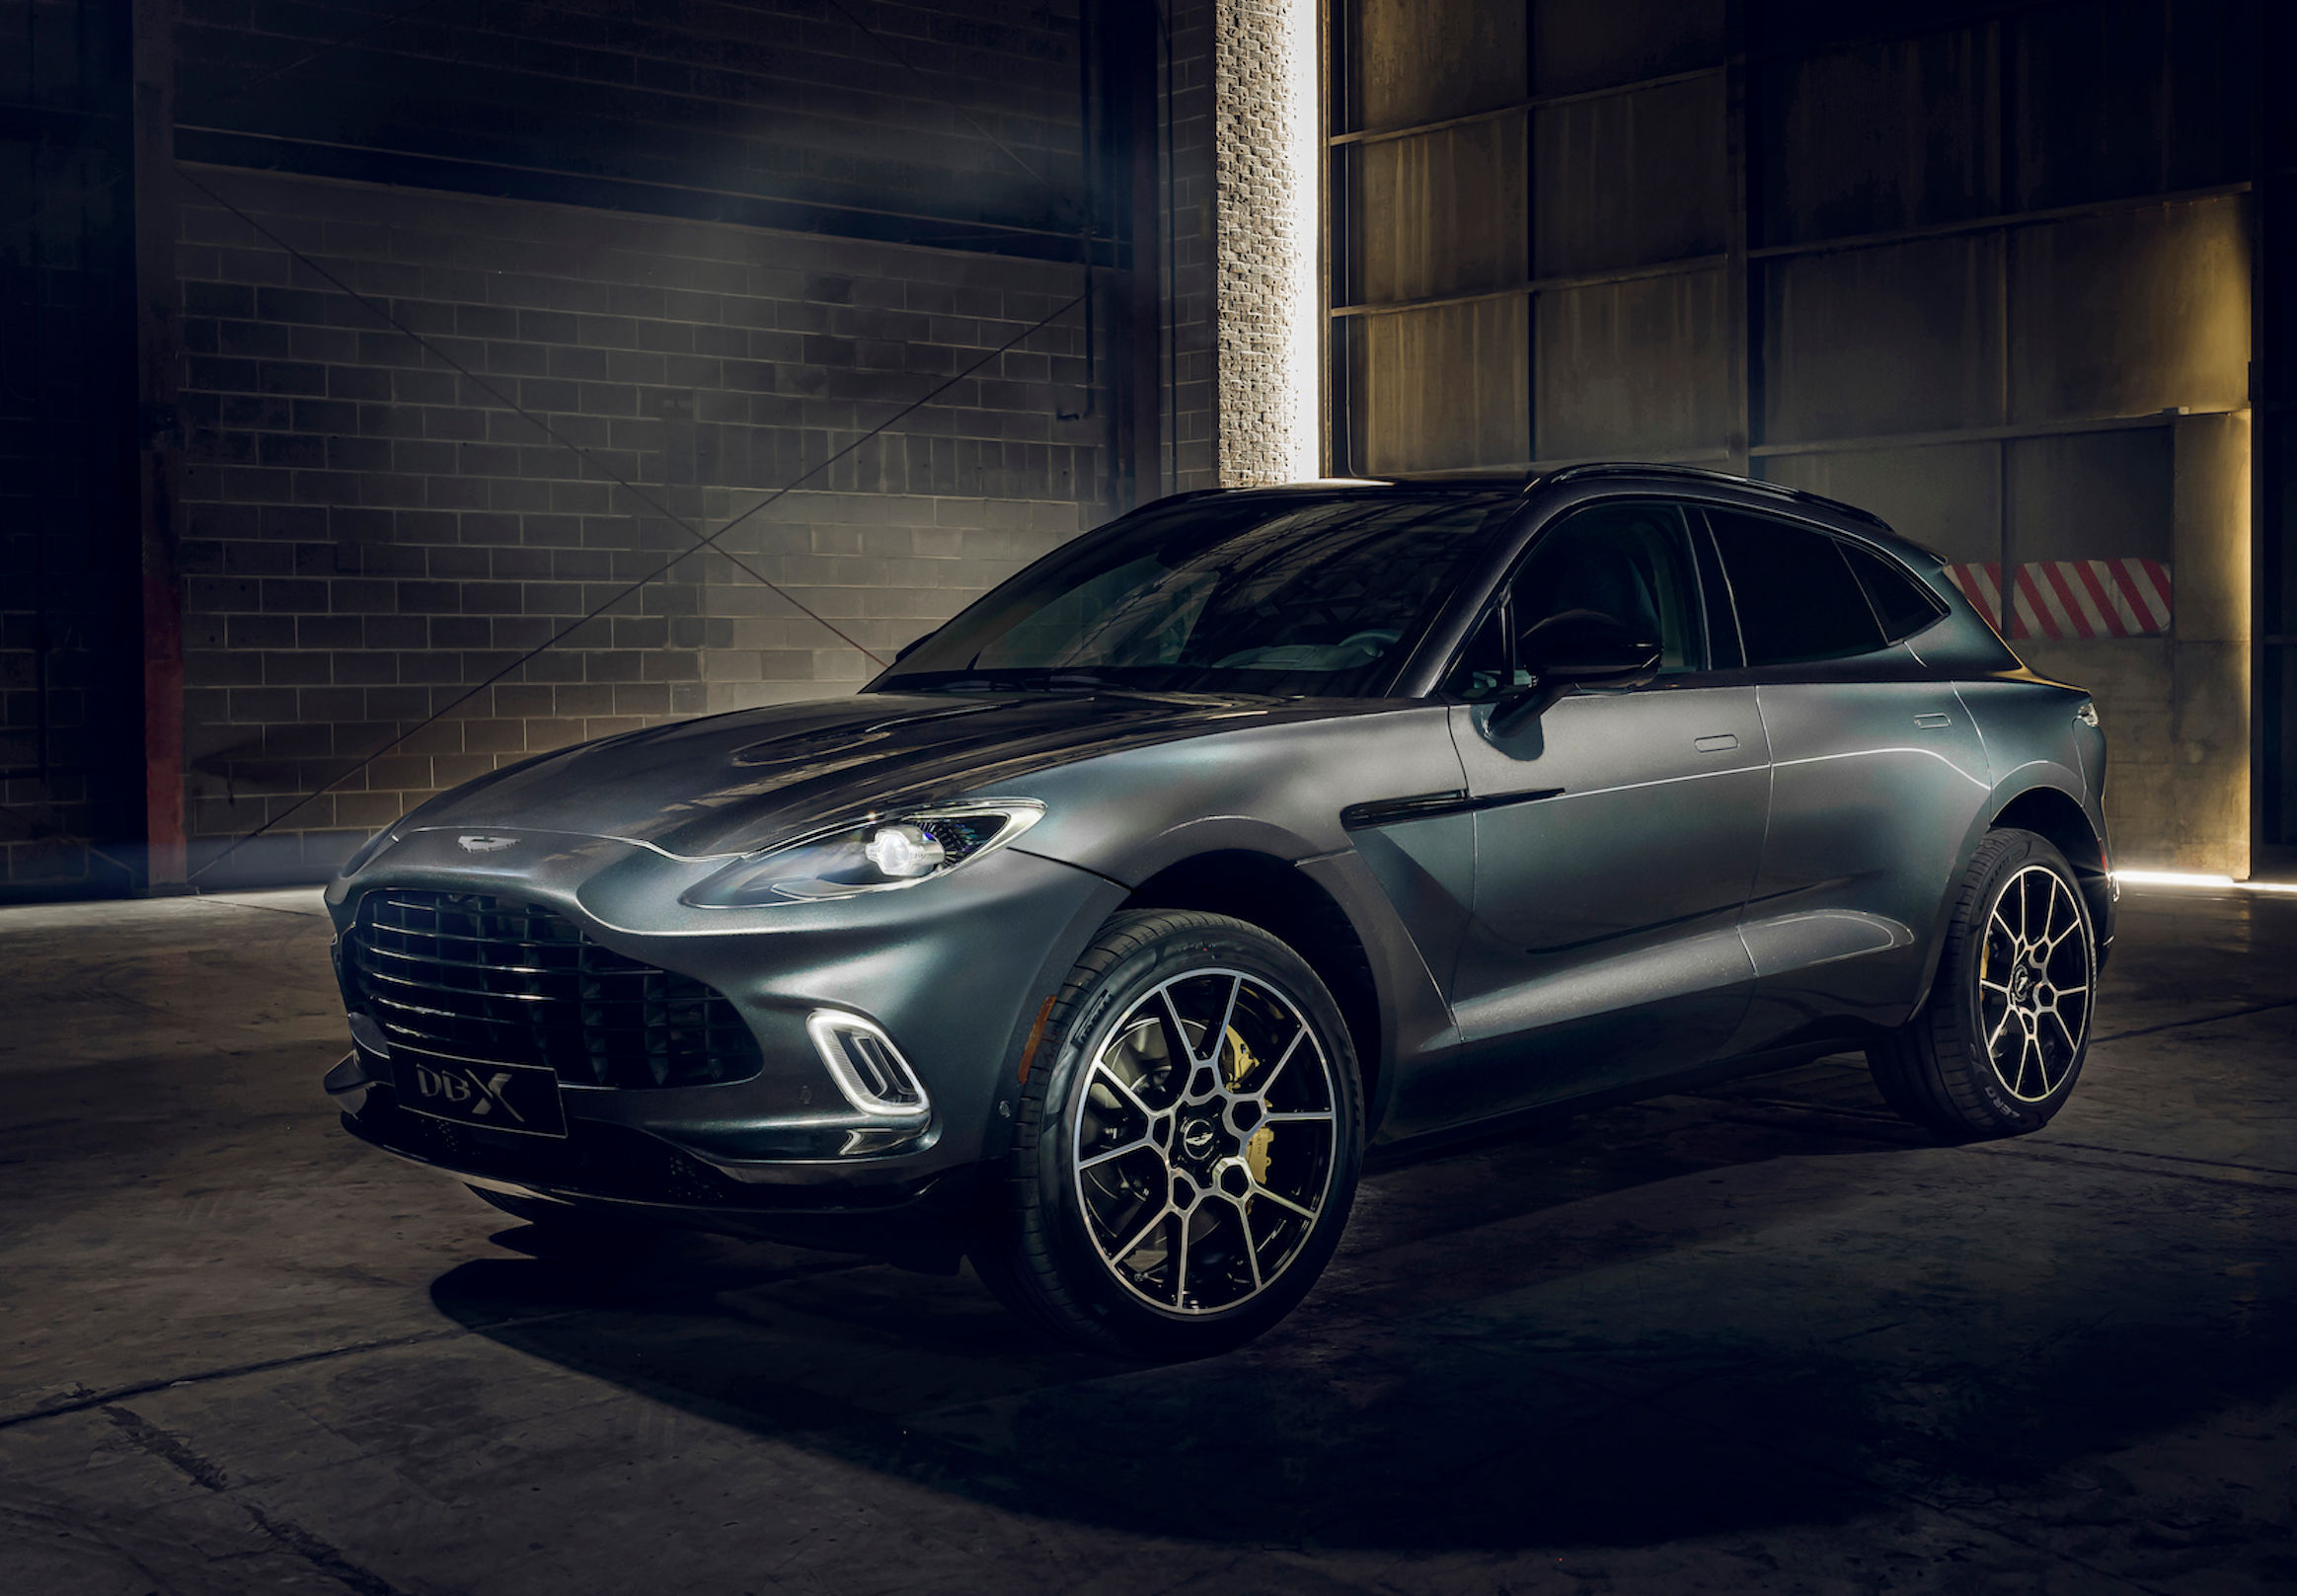 The Aston Martin Dbx Is A Super Suv Success Story